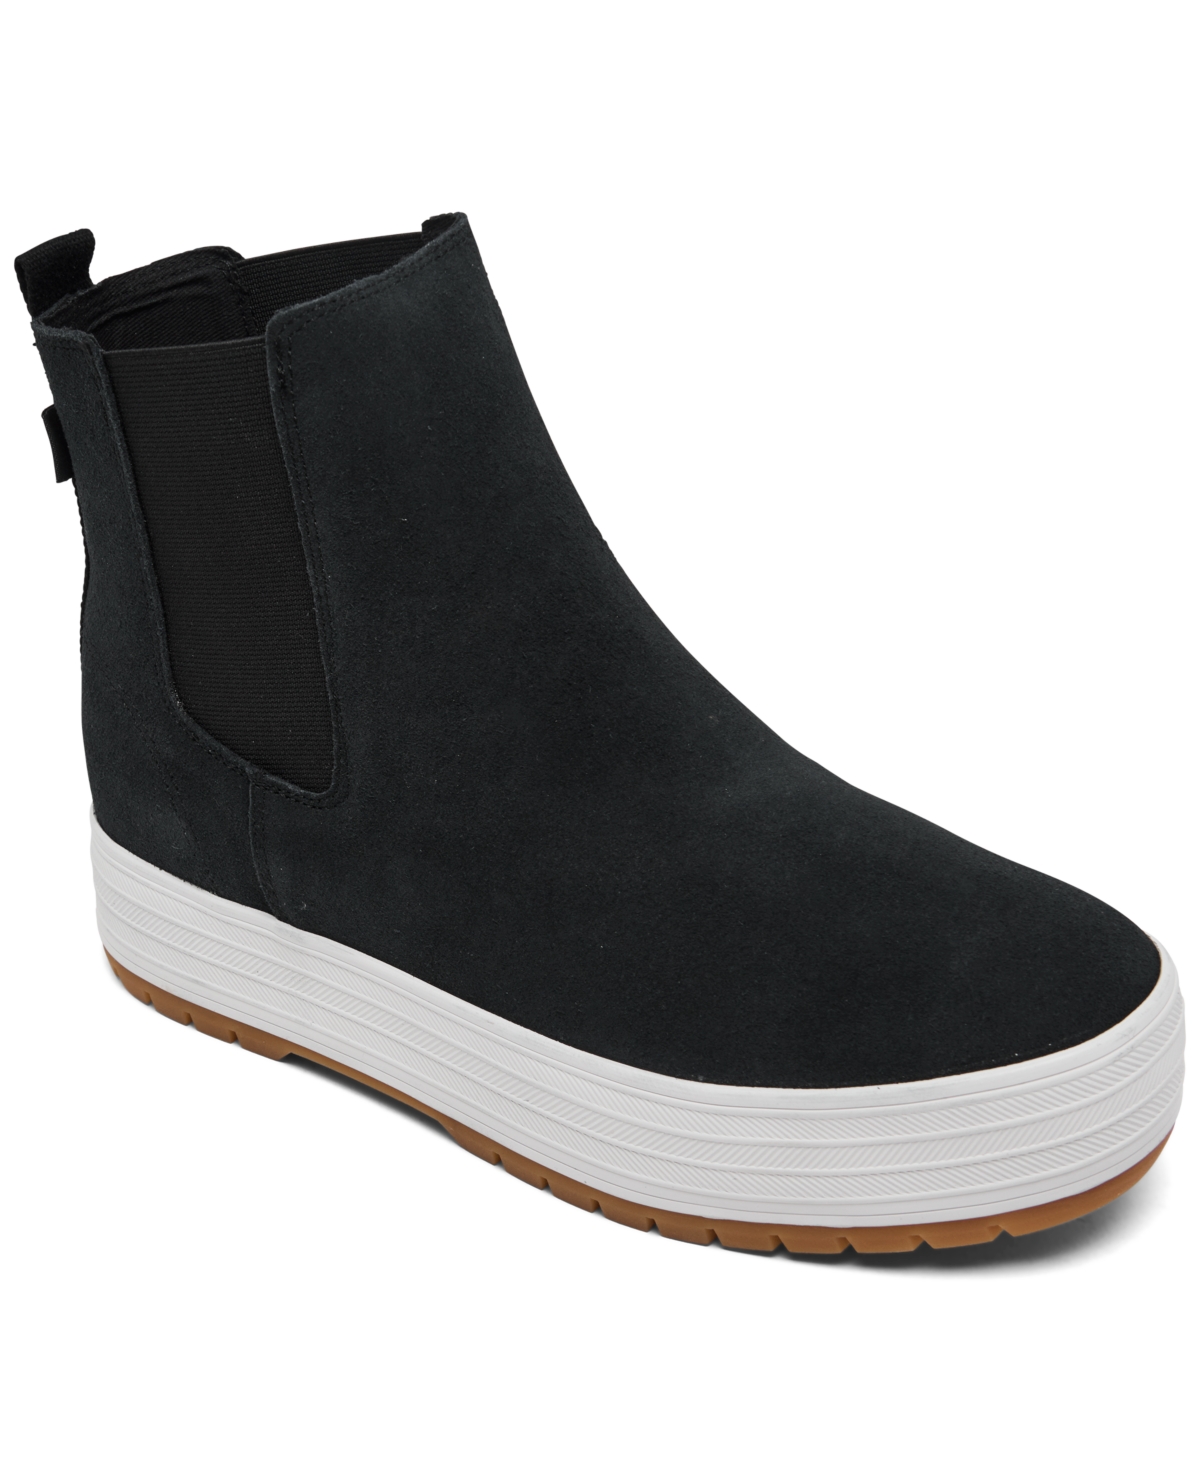 Women's Chelsea Lug Boots from Finish Line - Black